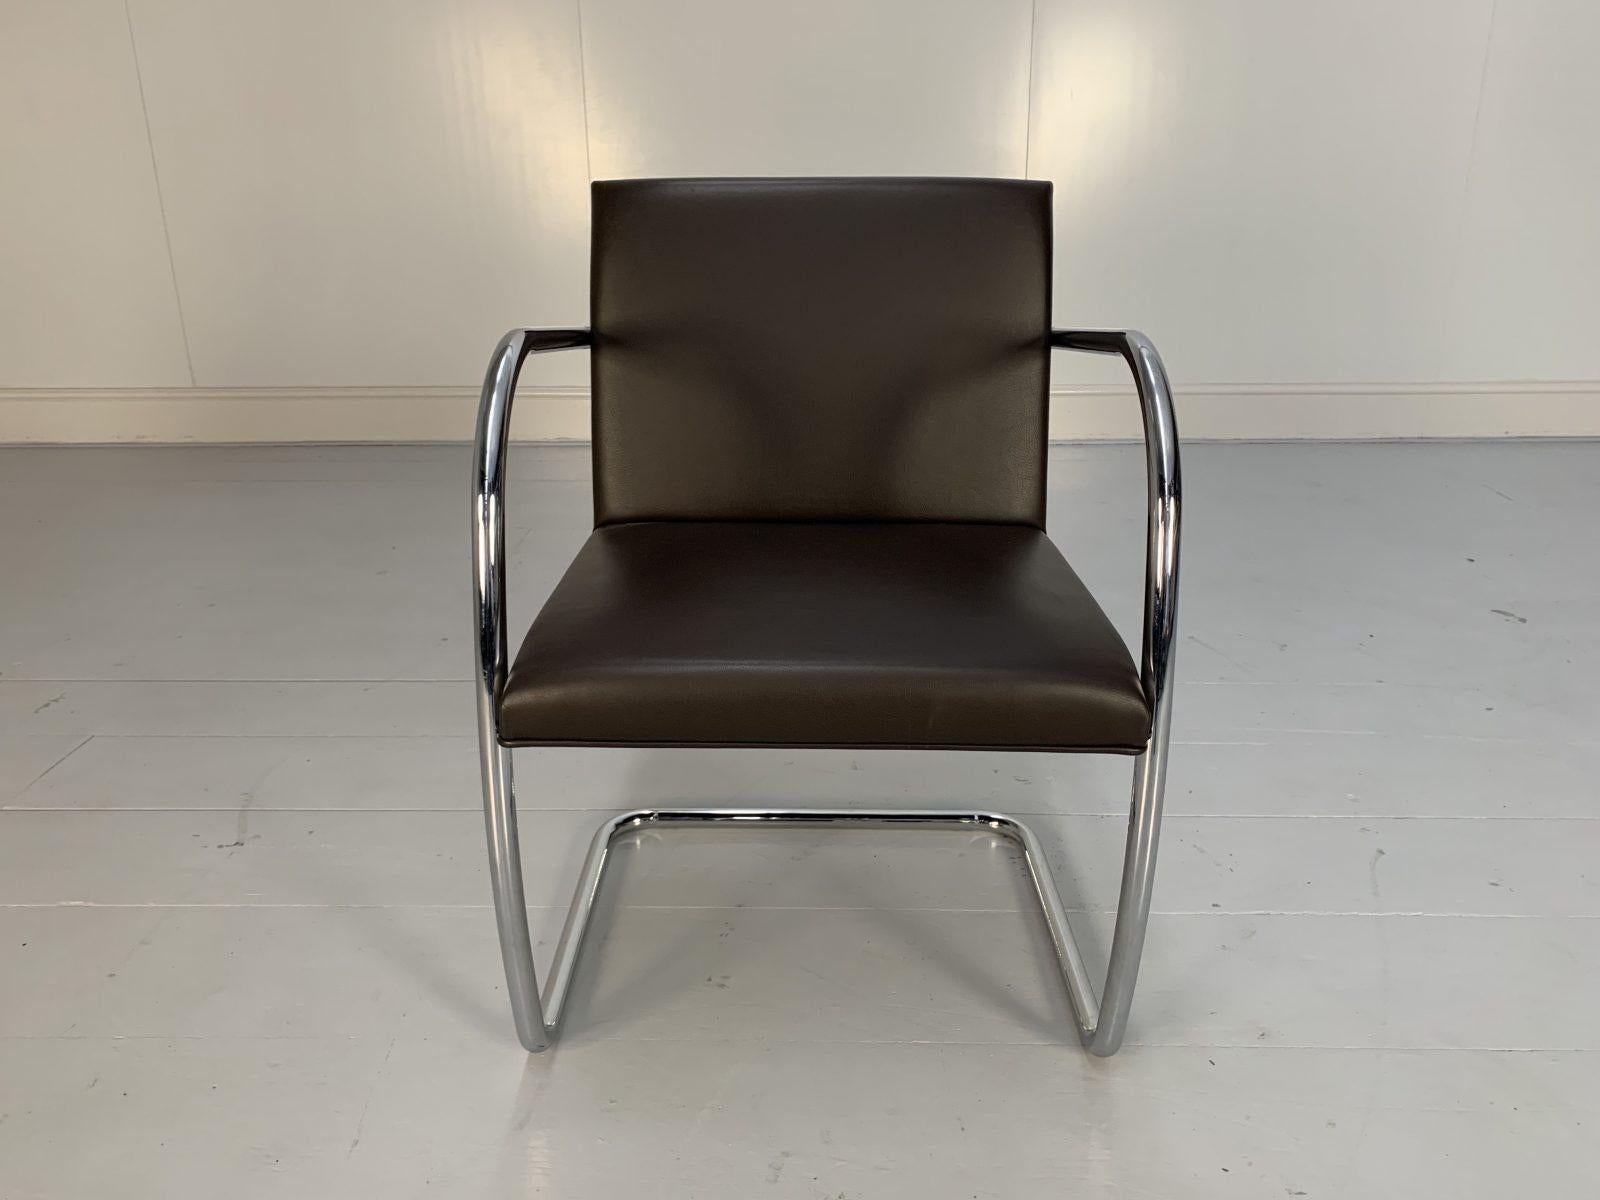 Pair of Knoll Studio “Brno Tubular” Lounge Chair Armchairs in Dark Brown Leather In Good Condition For Sale In Barrowford, GB